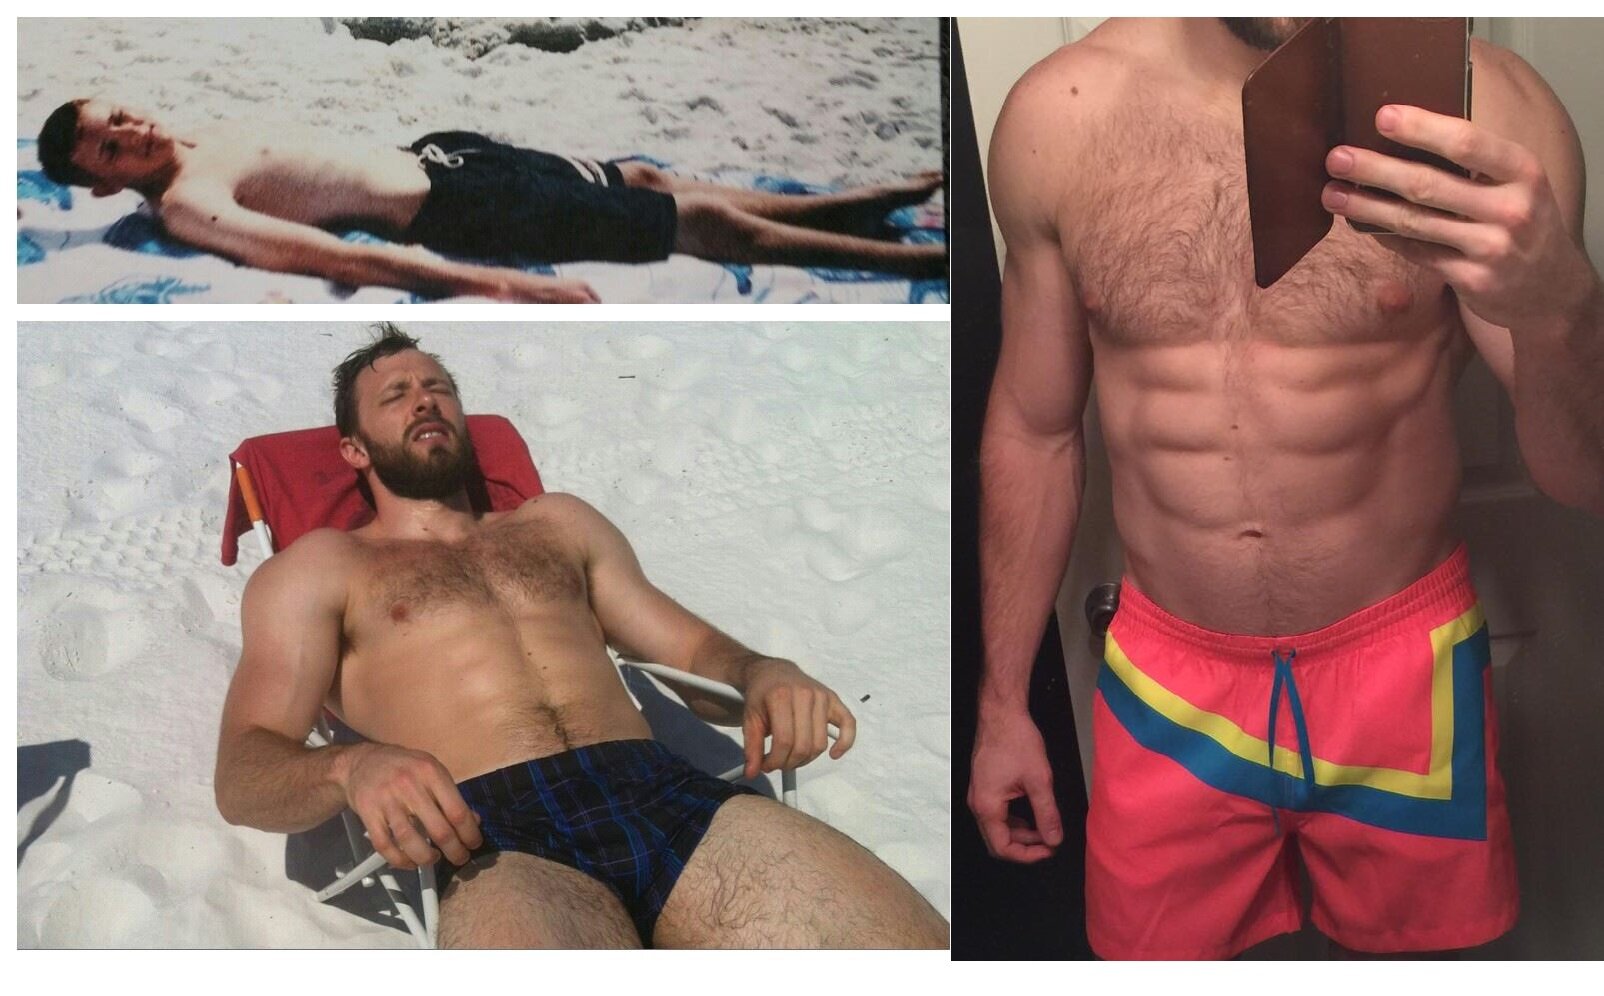 Author: Jeff Binek at 18 years old (145lbs), 27 years old (225lbs), 31 years old (212lbs)